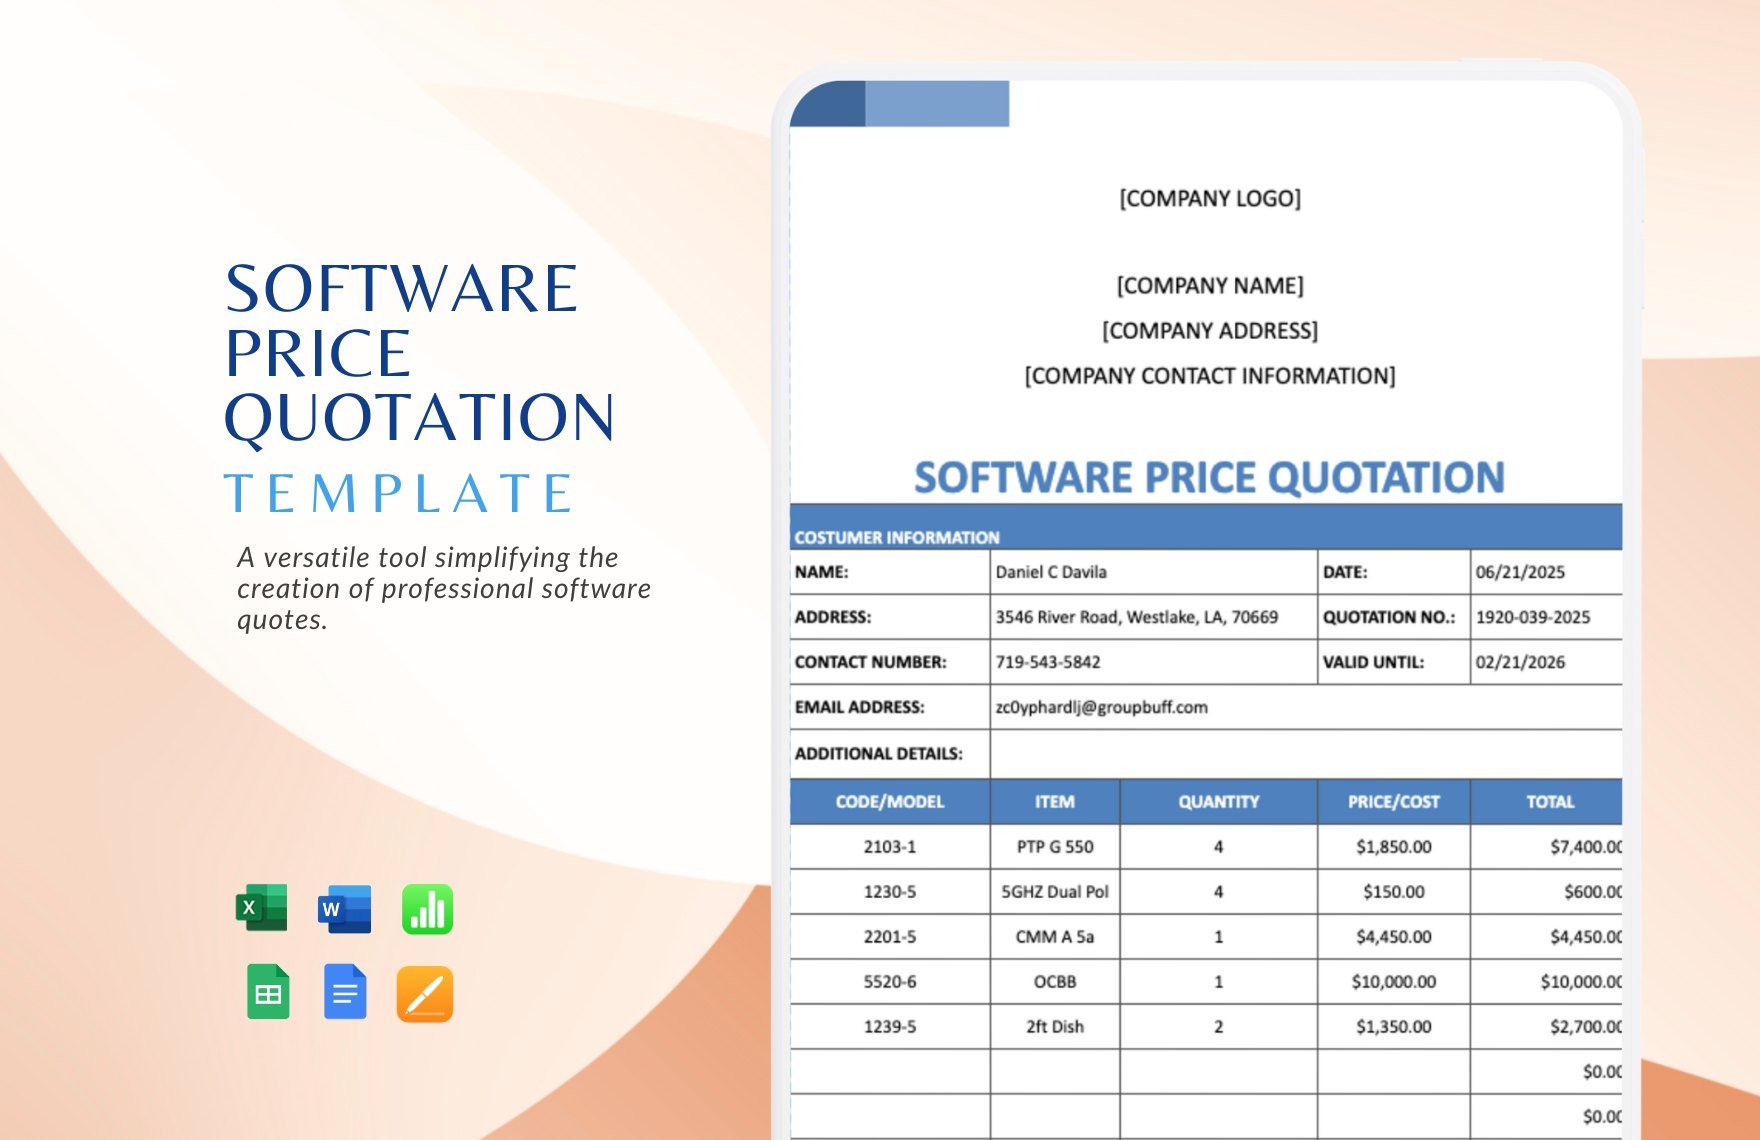 Software Price Quotation Template in Word, Google Docs, Excel, Google Sheets, Apple Pages, Apple Numbers